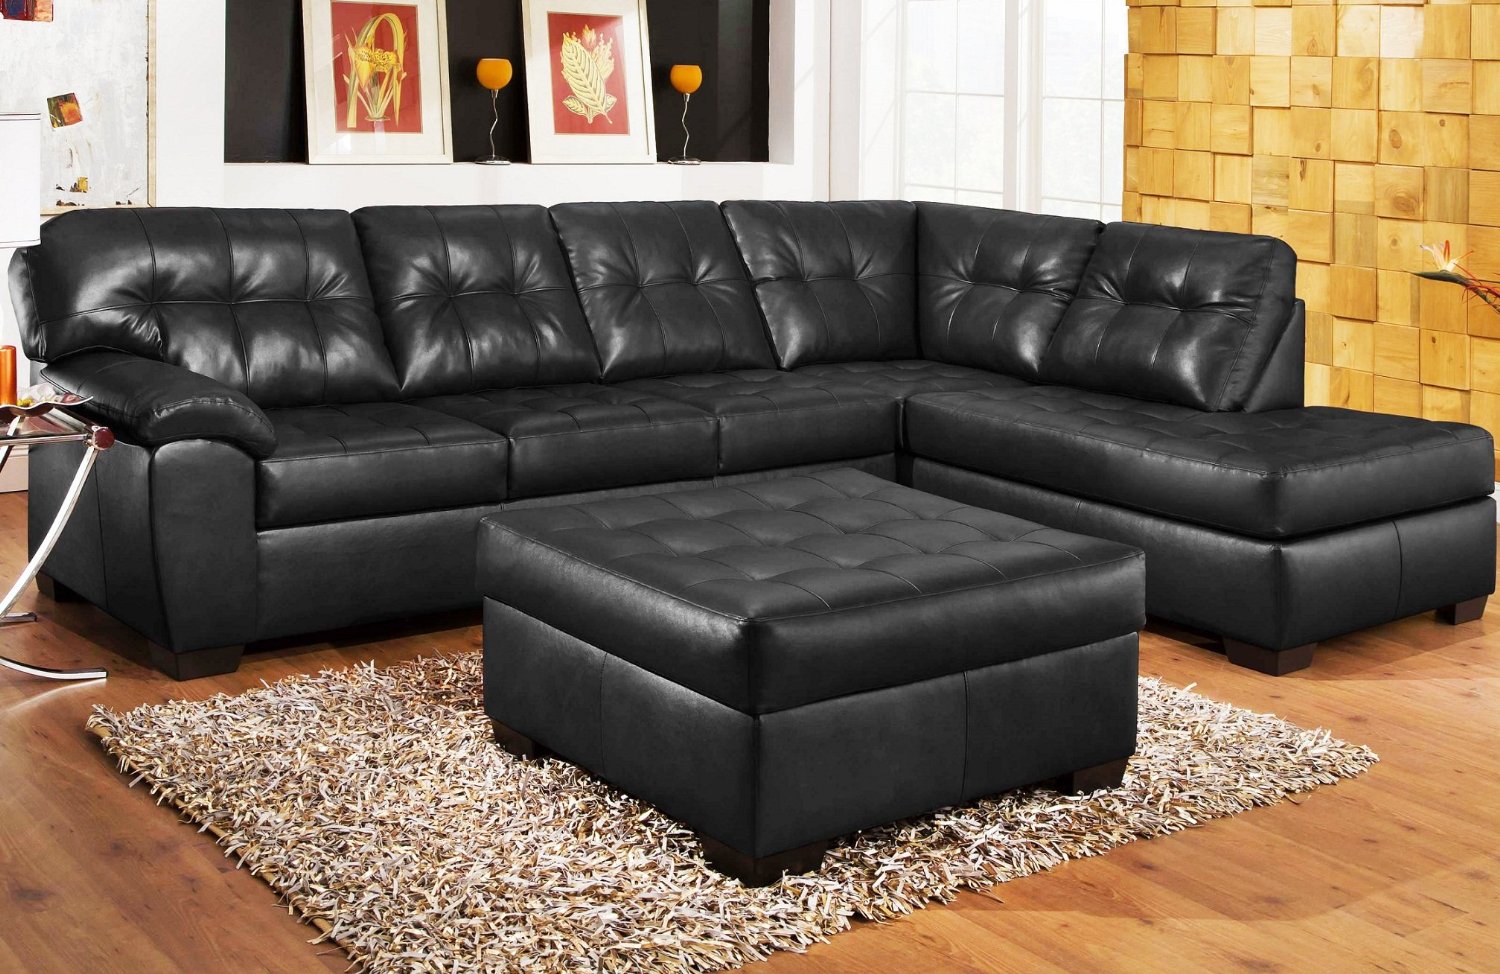 Furniture + Accessories Modern Black Leather Sectional Sofa For Living Room Furniture Set With Fur Rug Laminated Wooden Floor Wooden Cube Wall Picture Wall Ideas Best Leather Sectional Sofa for Modern Home Furniture